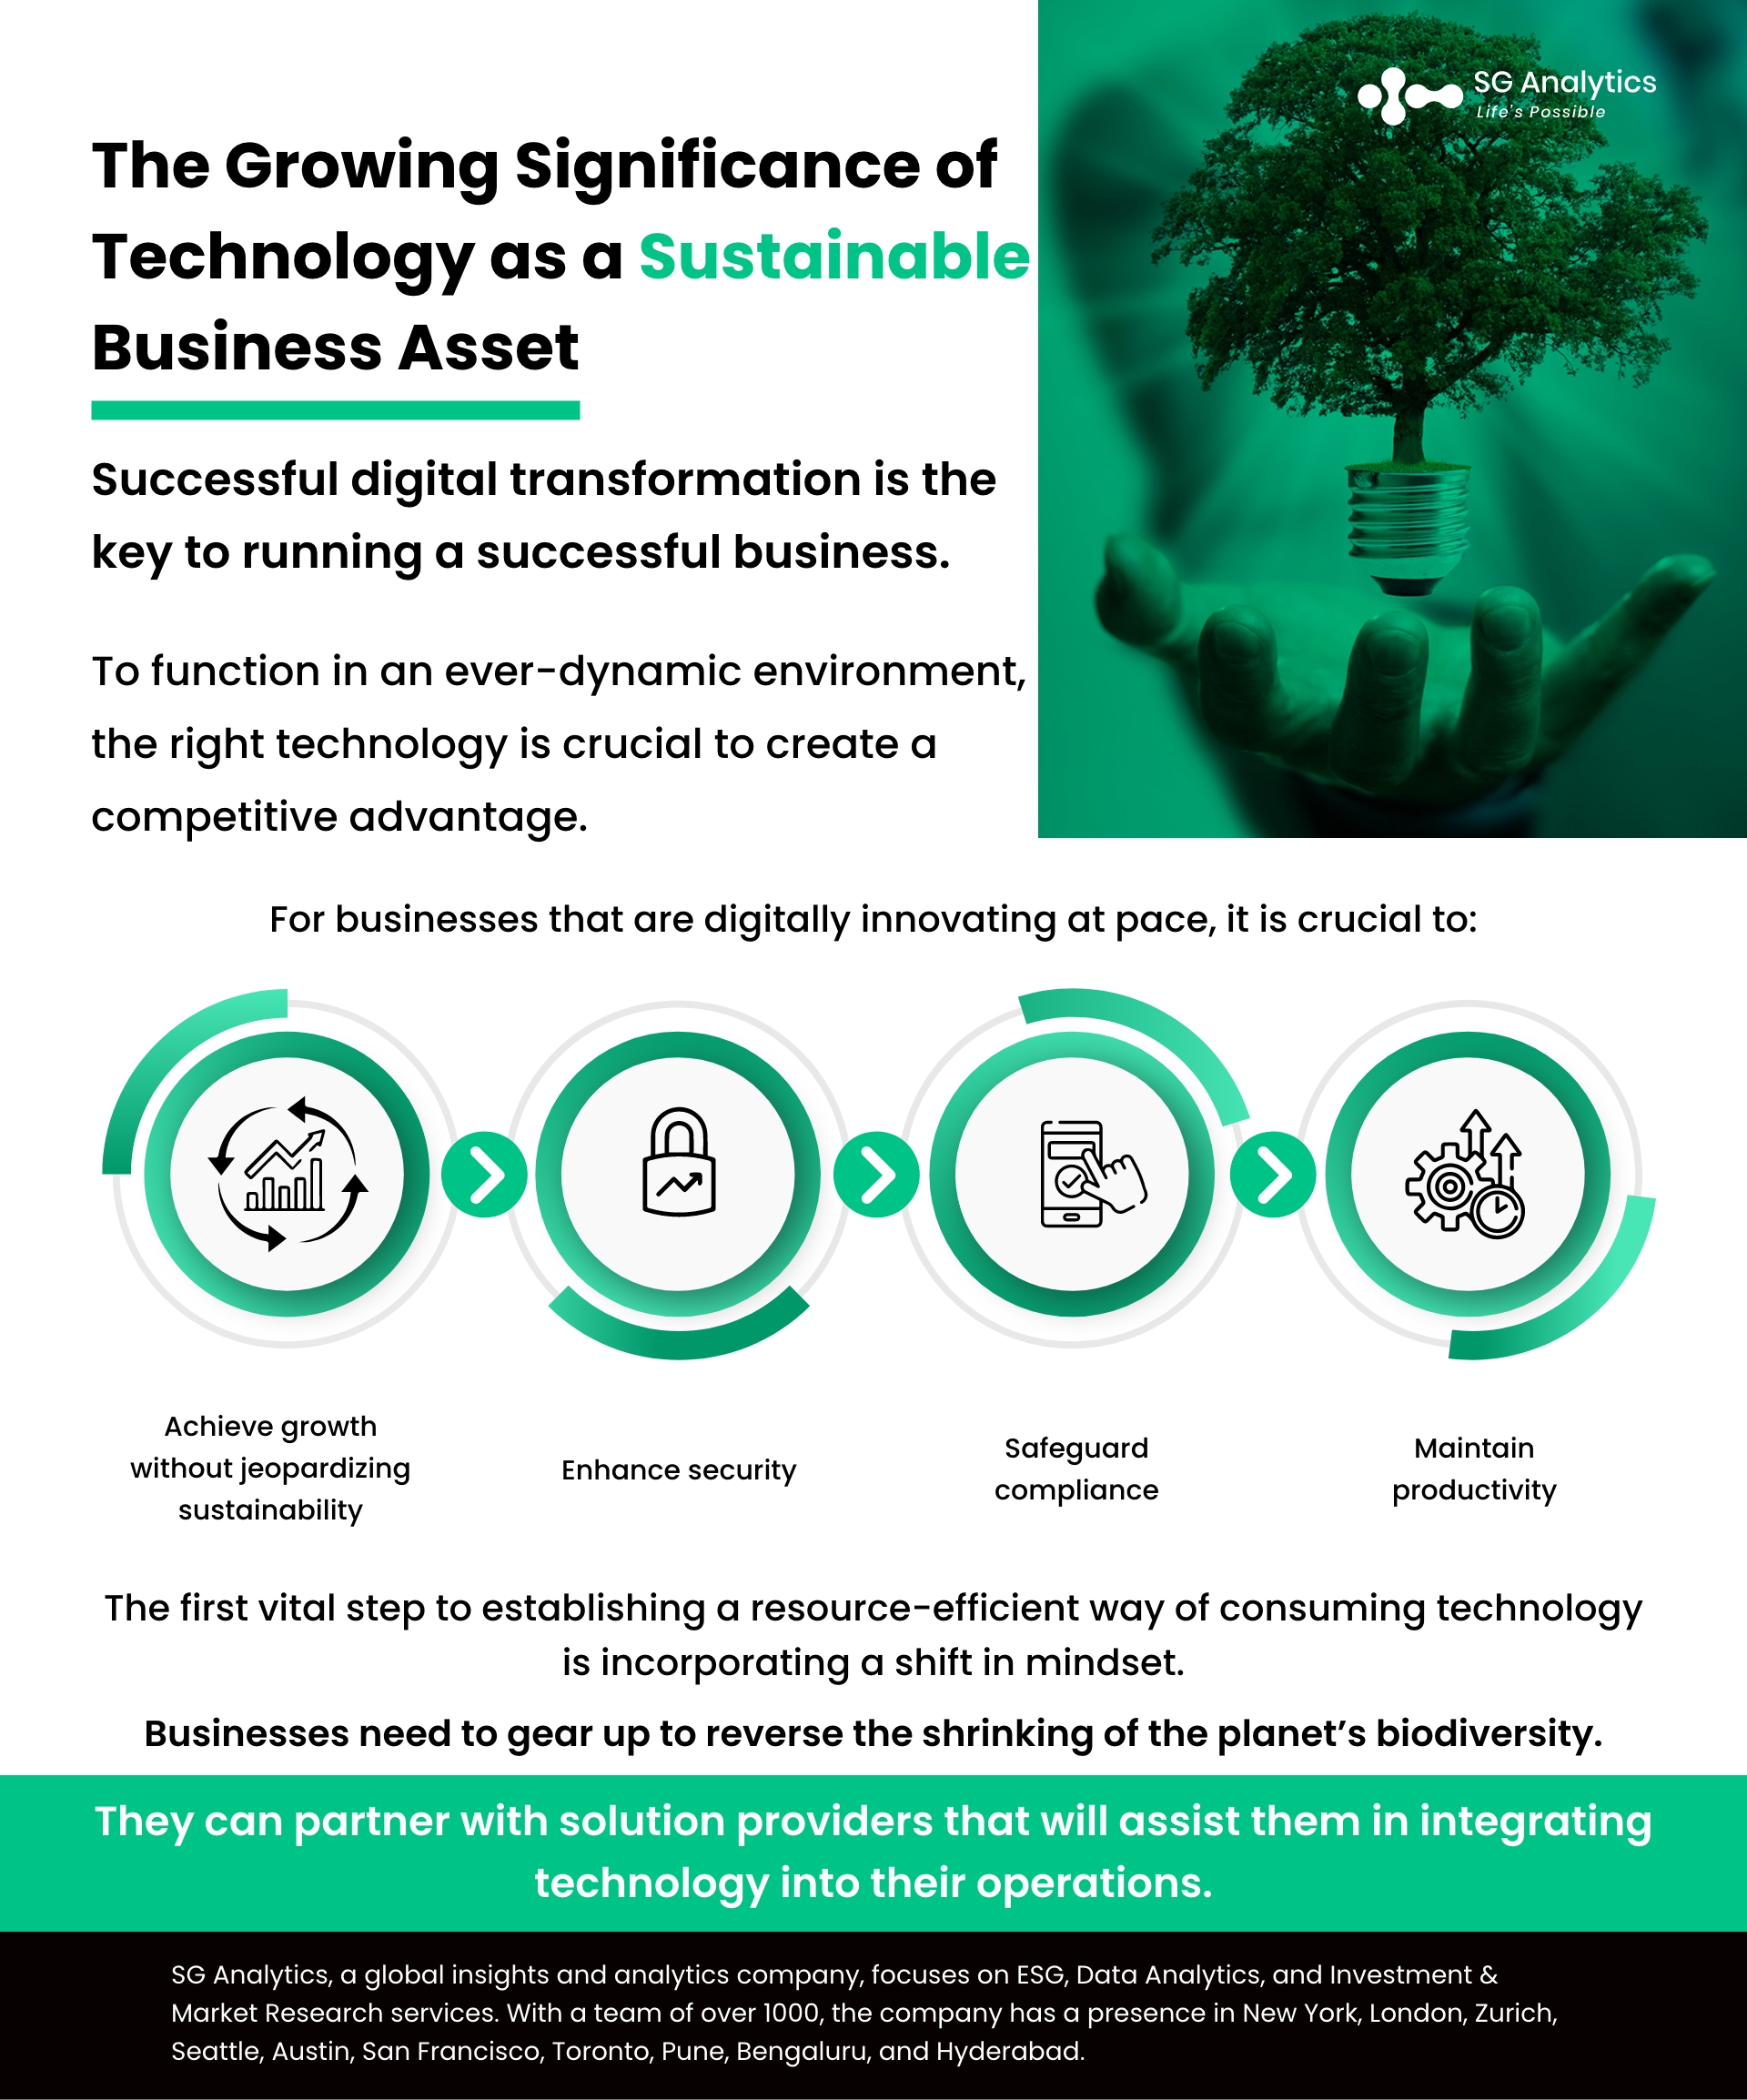 SGAalytics_Infographic_The Growing Significance of Technology as a Sustainable Business Asset 